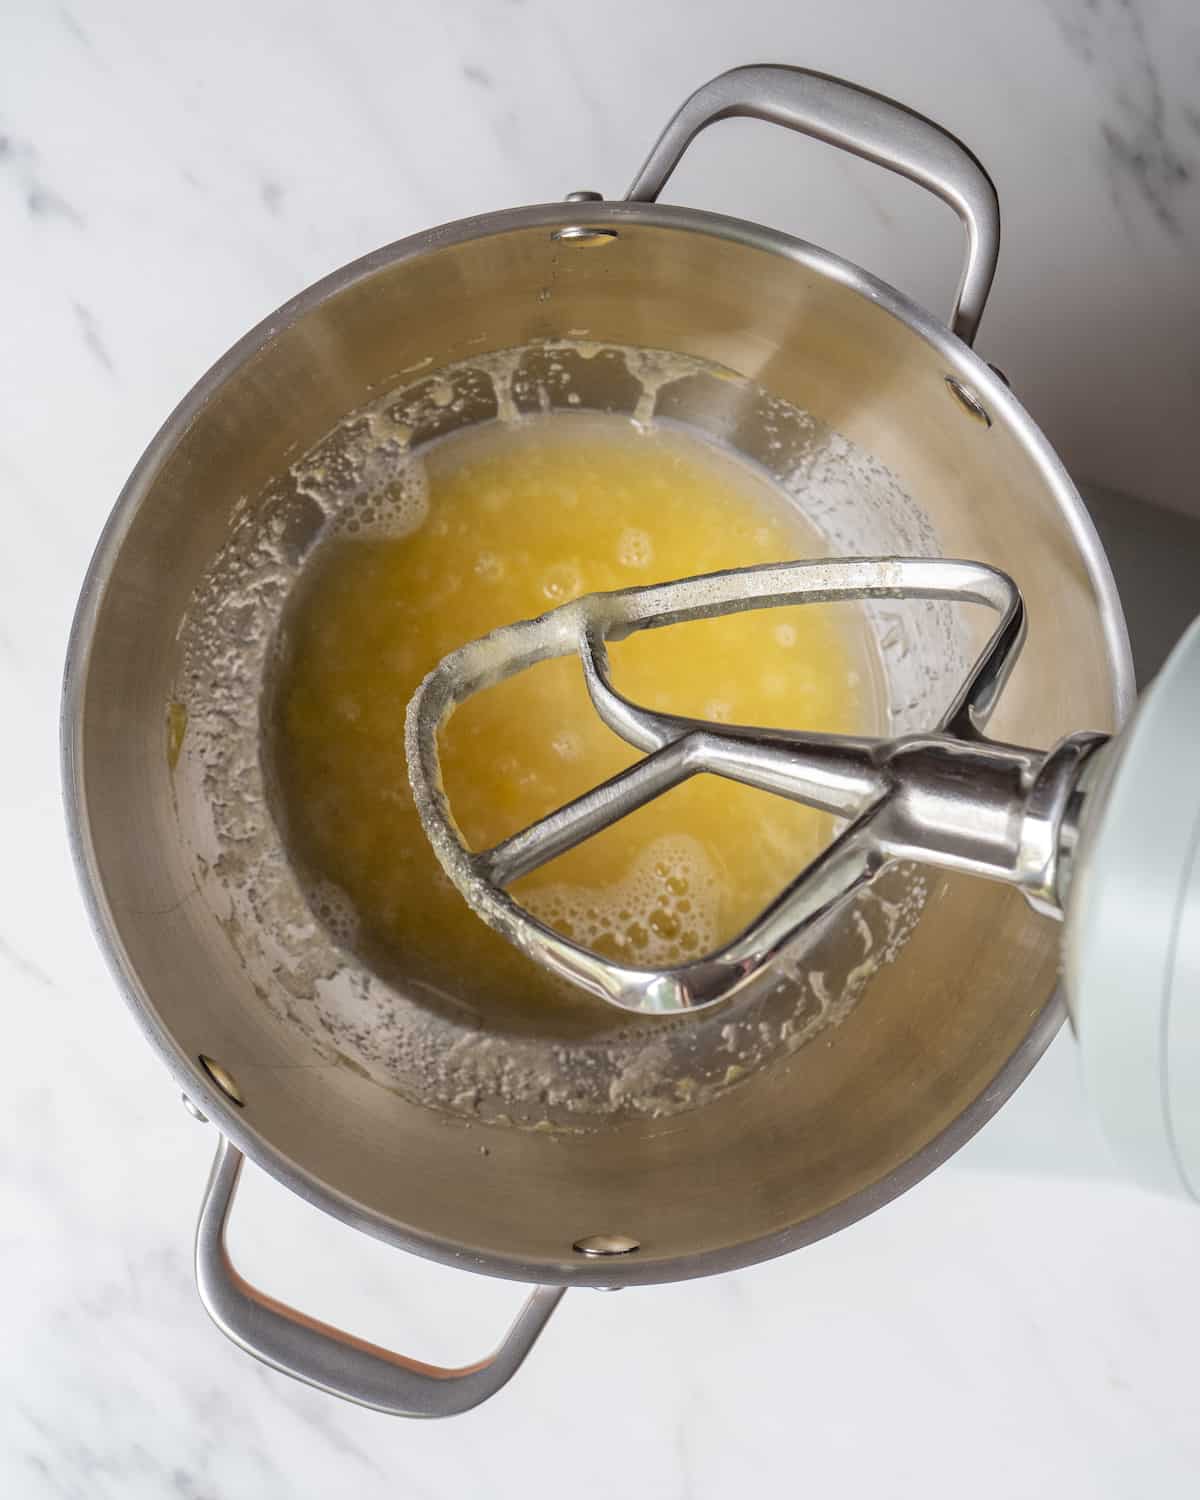 Eggs, sugar, vegetable oil, and vanilla has been mixed together in a stand mixer.  